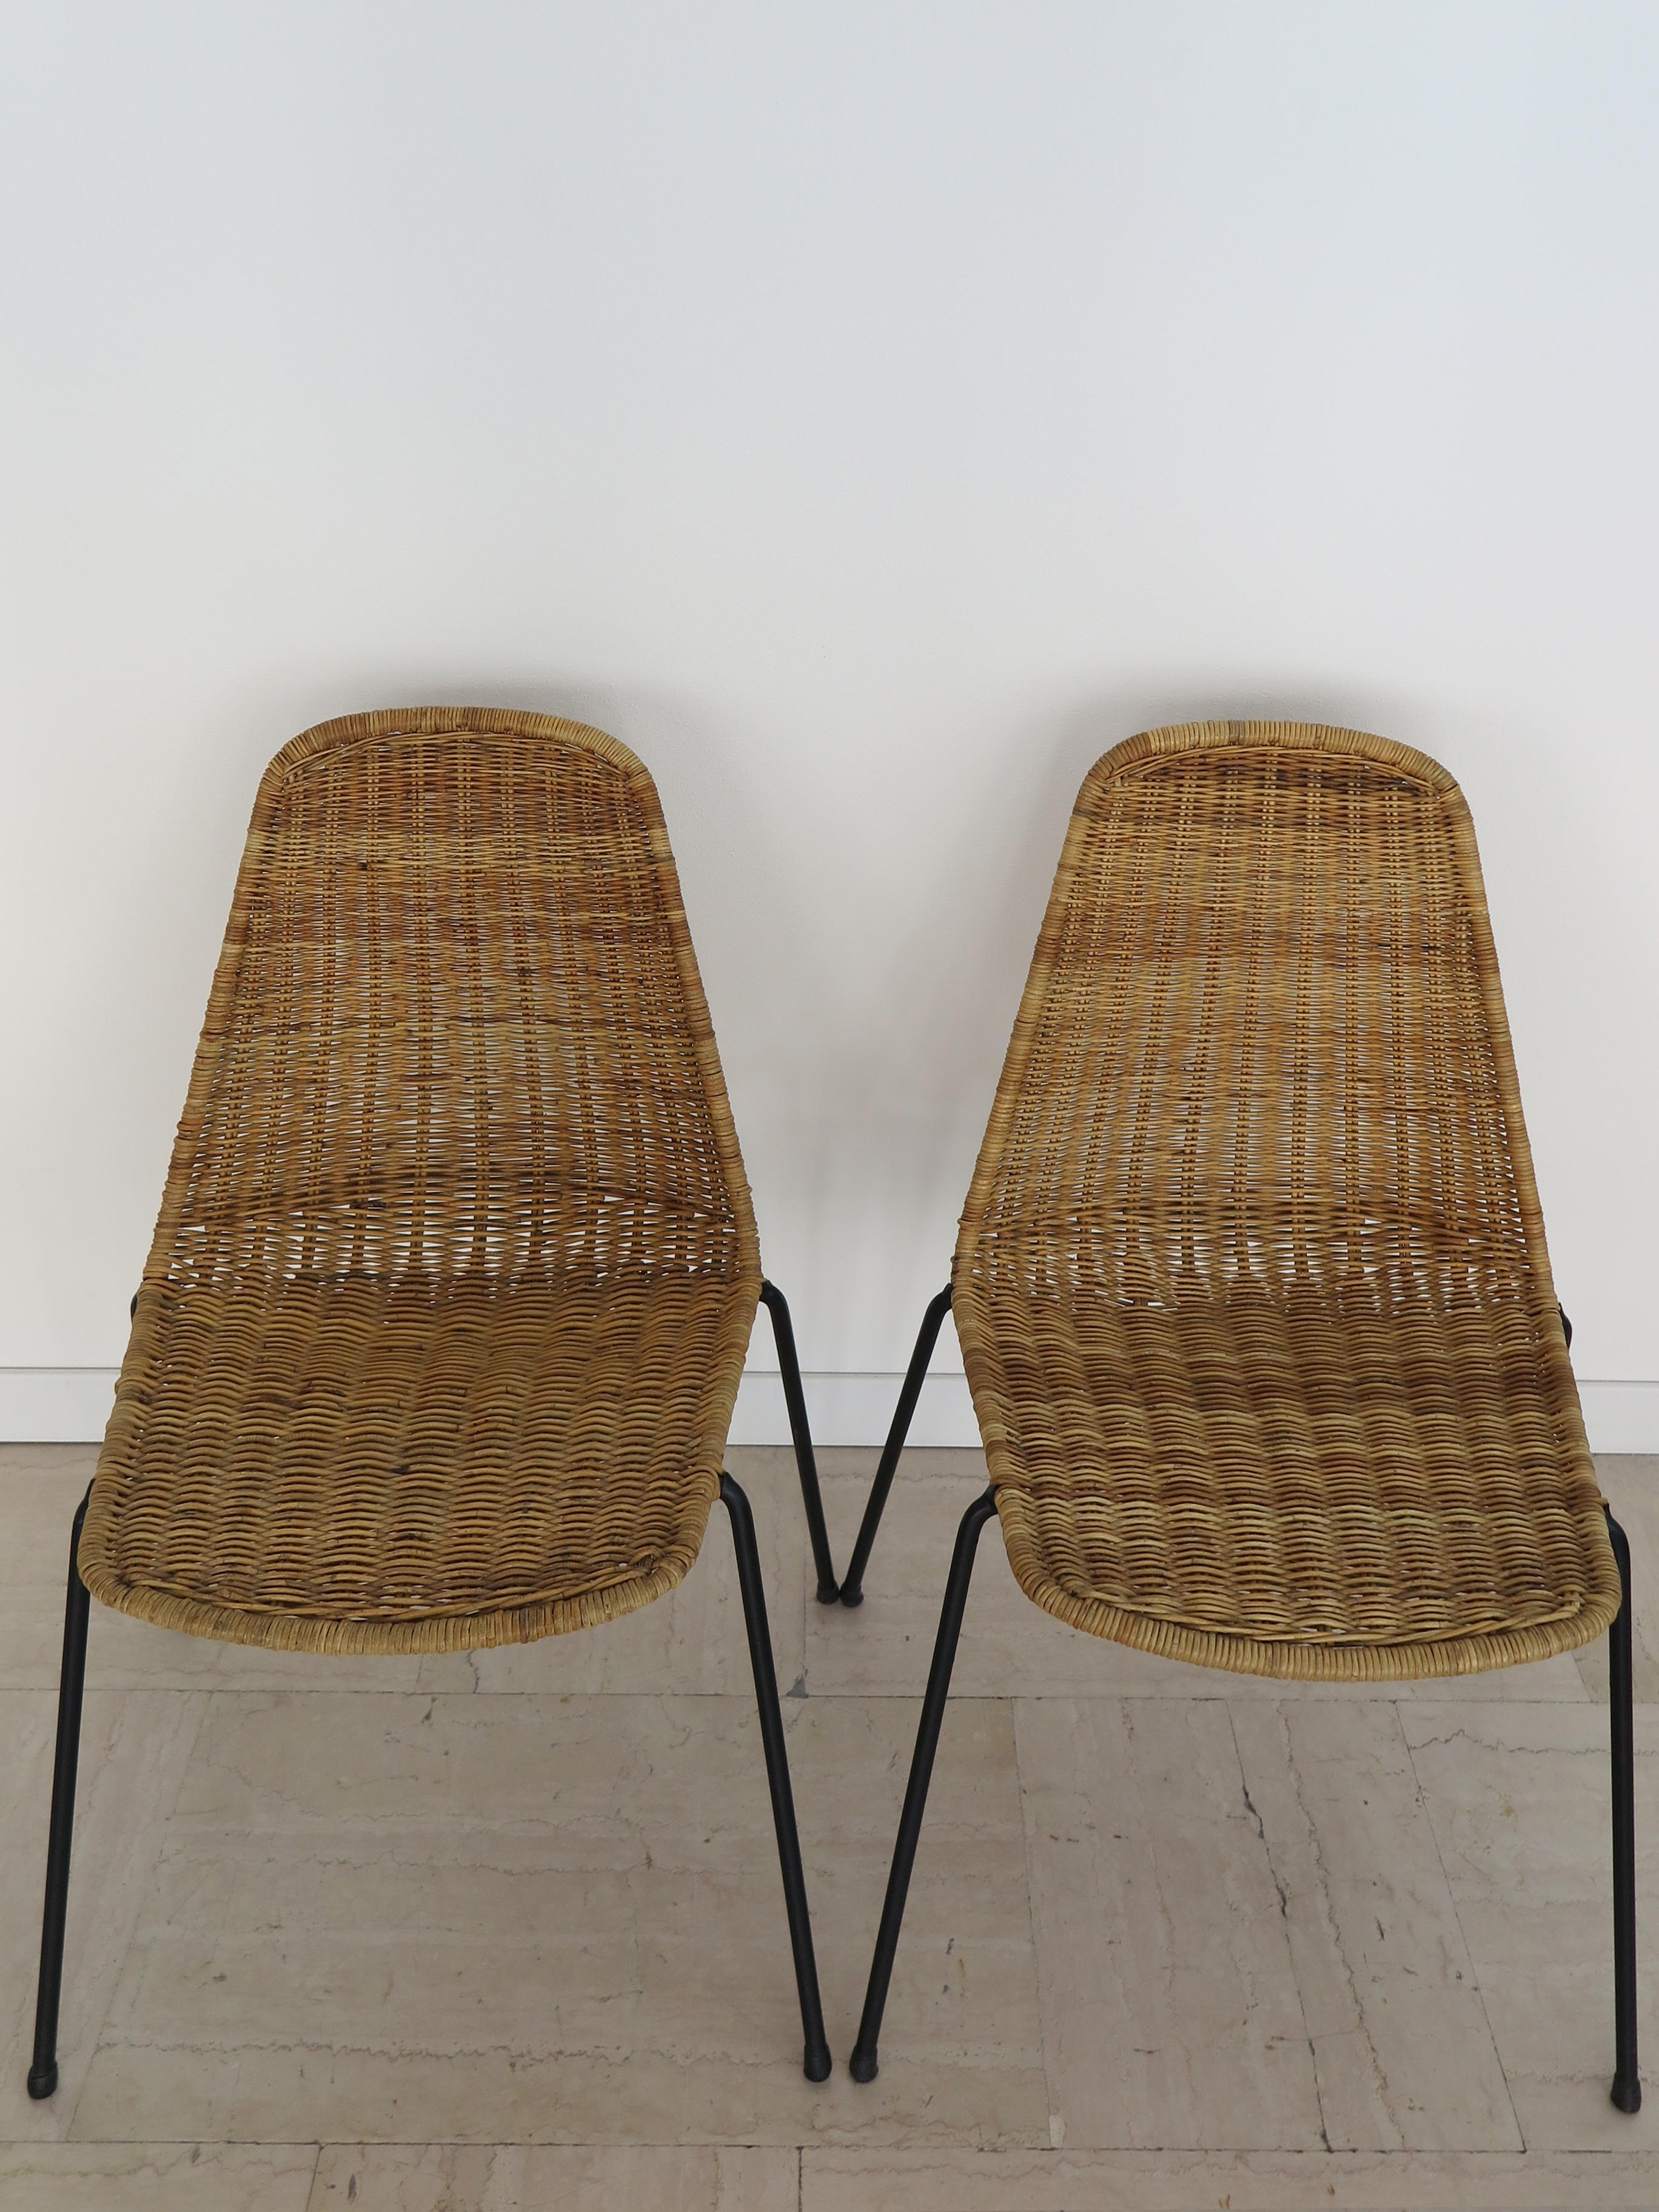 Varnished Italian Midcentury Rattan Dining Chairs Design Campo & Graffi for Home, 1950s For Sale